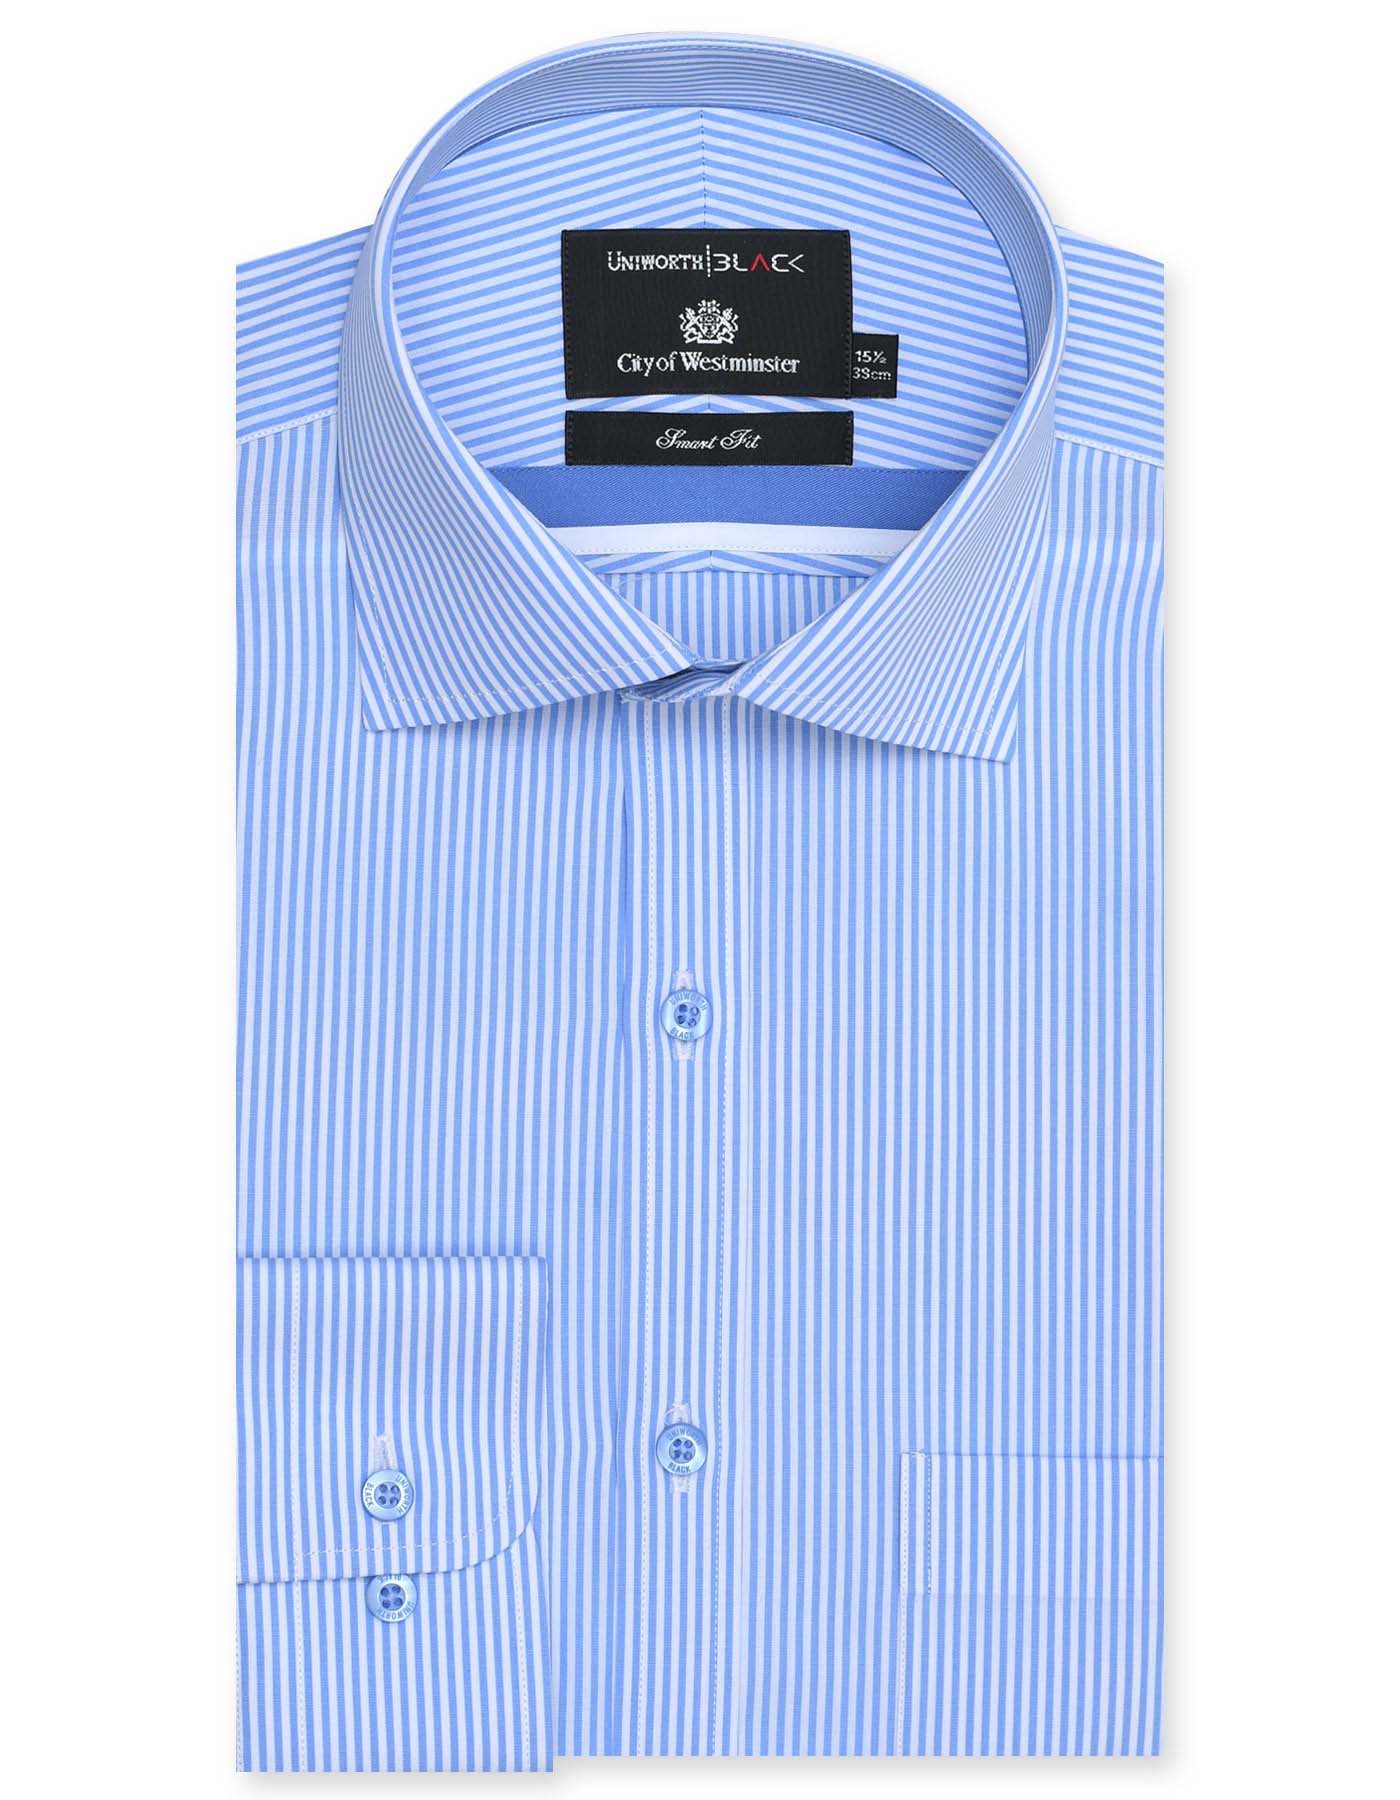 Striped Shirts For Men Online Shopping in Pakistan at Uniworth shop